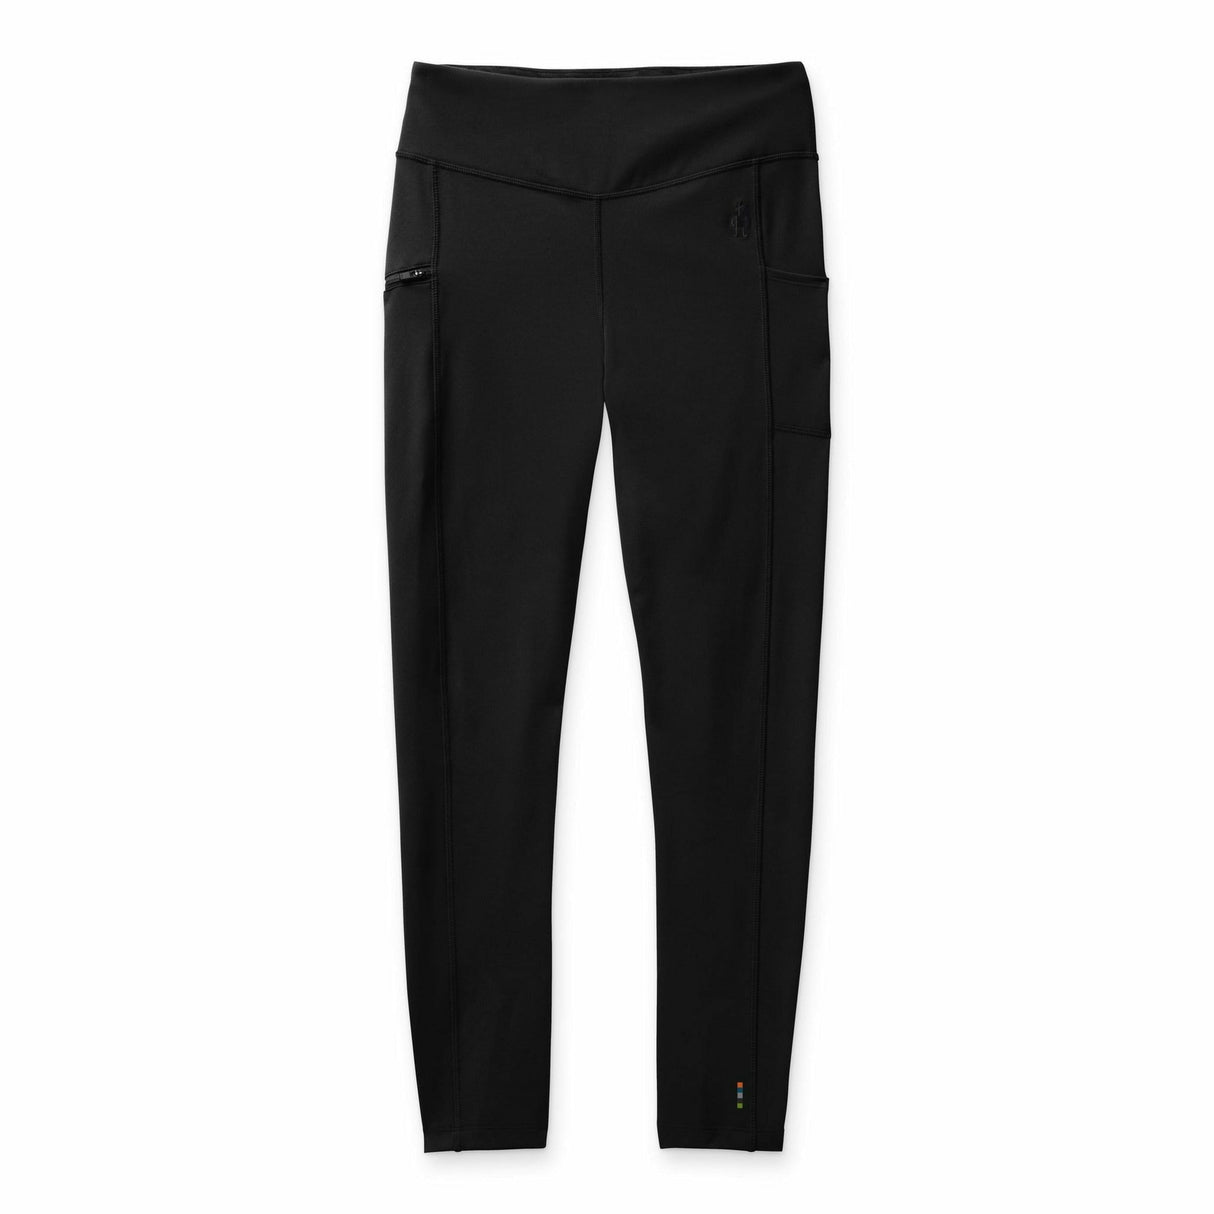 Smartwool Womens Active 7/8 Leggings - Clearance  -  X-Small / Black